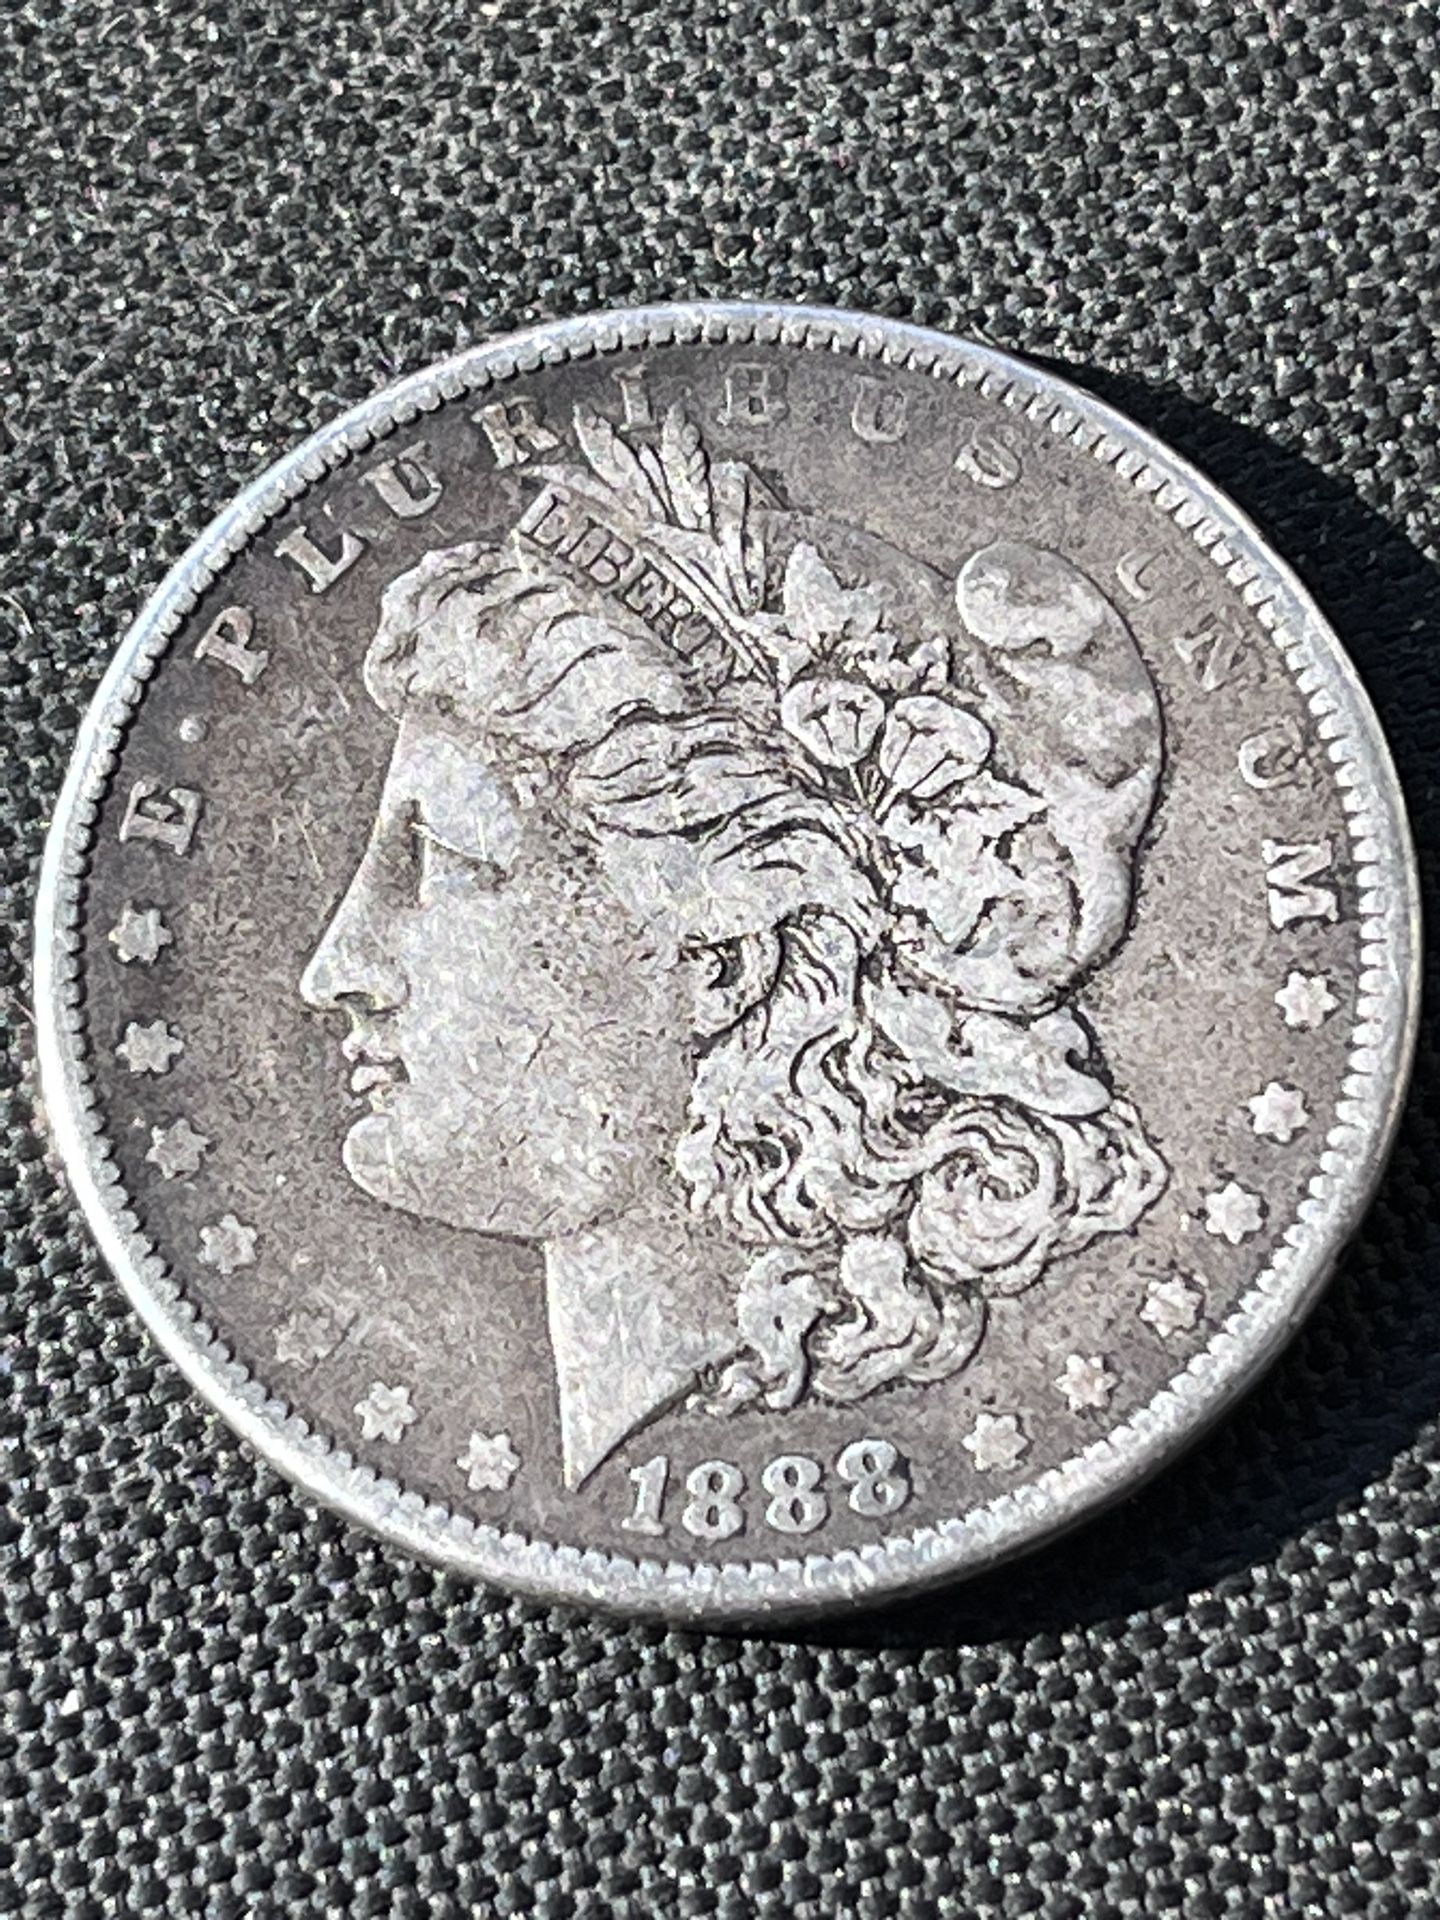 Authentic US Minted 1888 Morgan Silver Dollar 